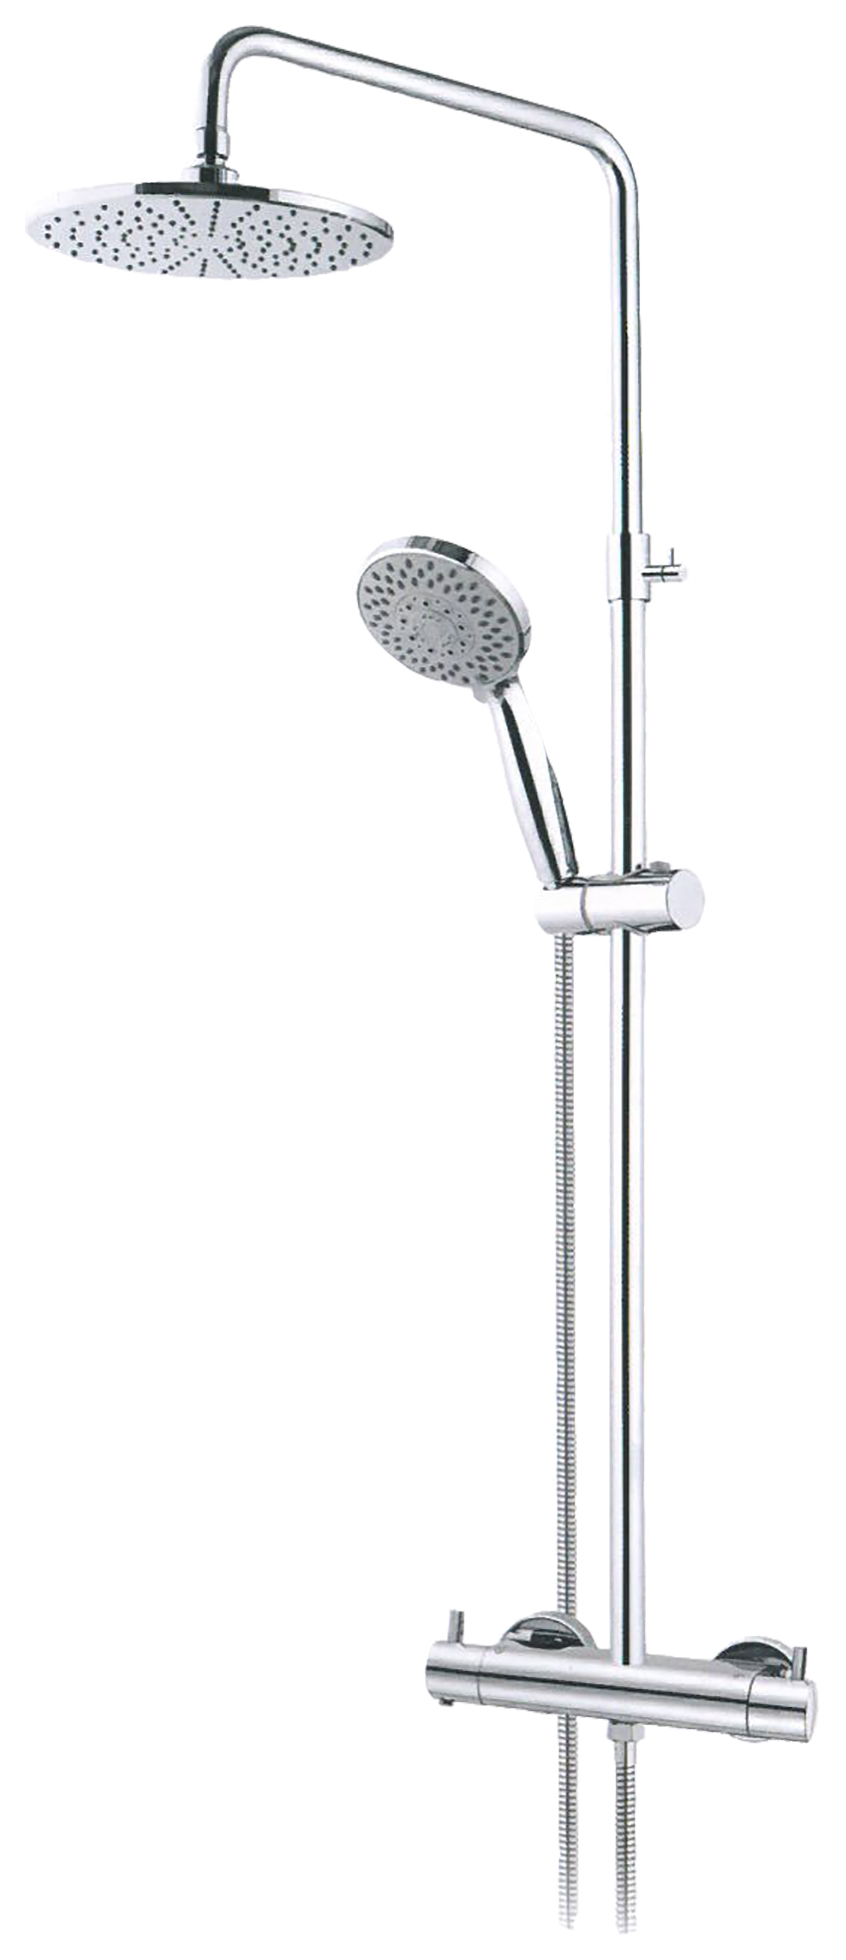 Hadleigh Wall Mounted Dual Outlet Shower Mixer - Chrome